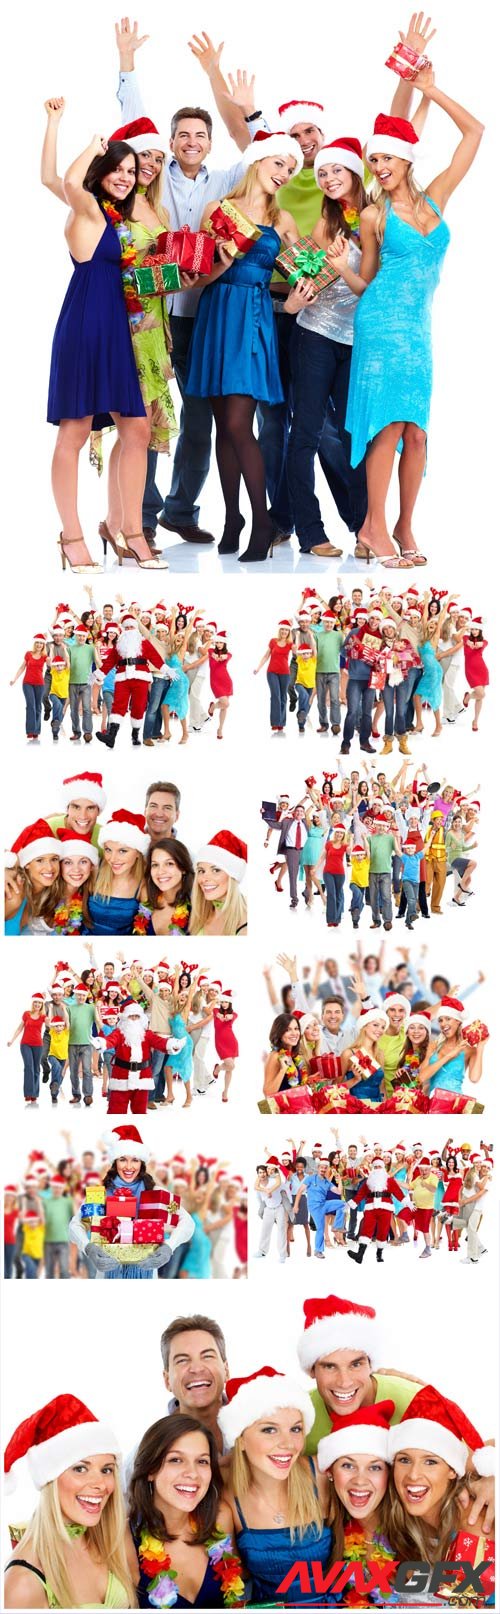 New Year and Christmas stock photos №8